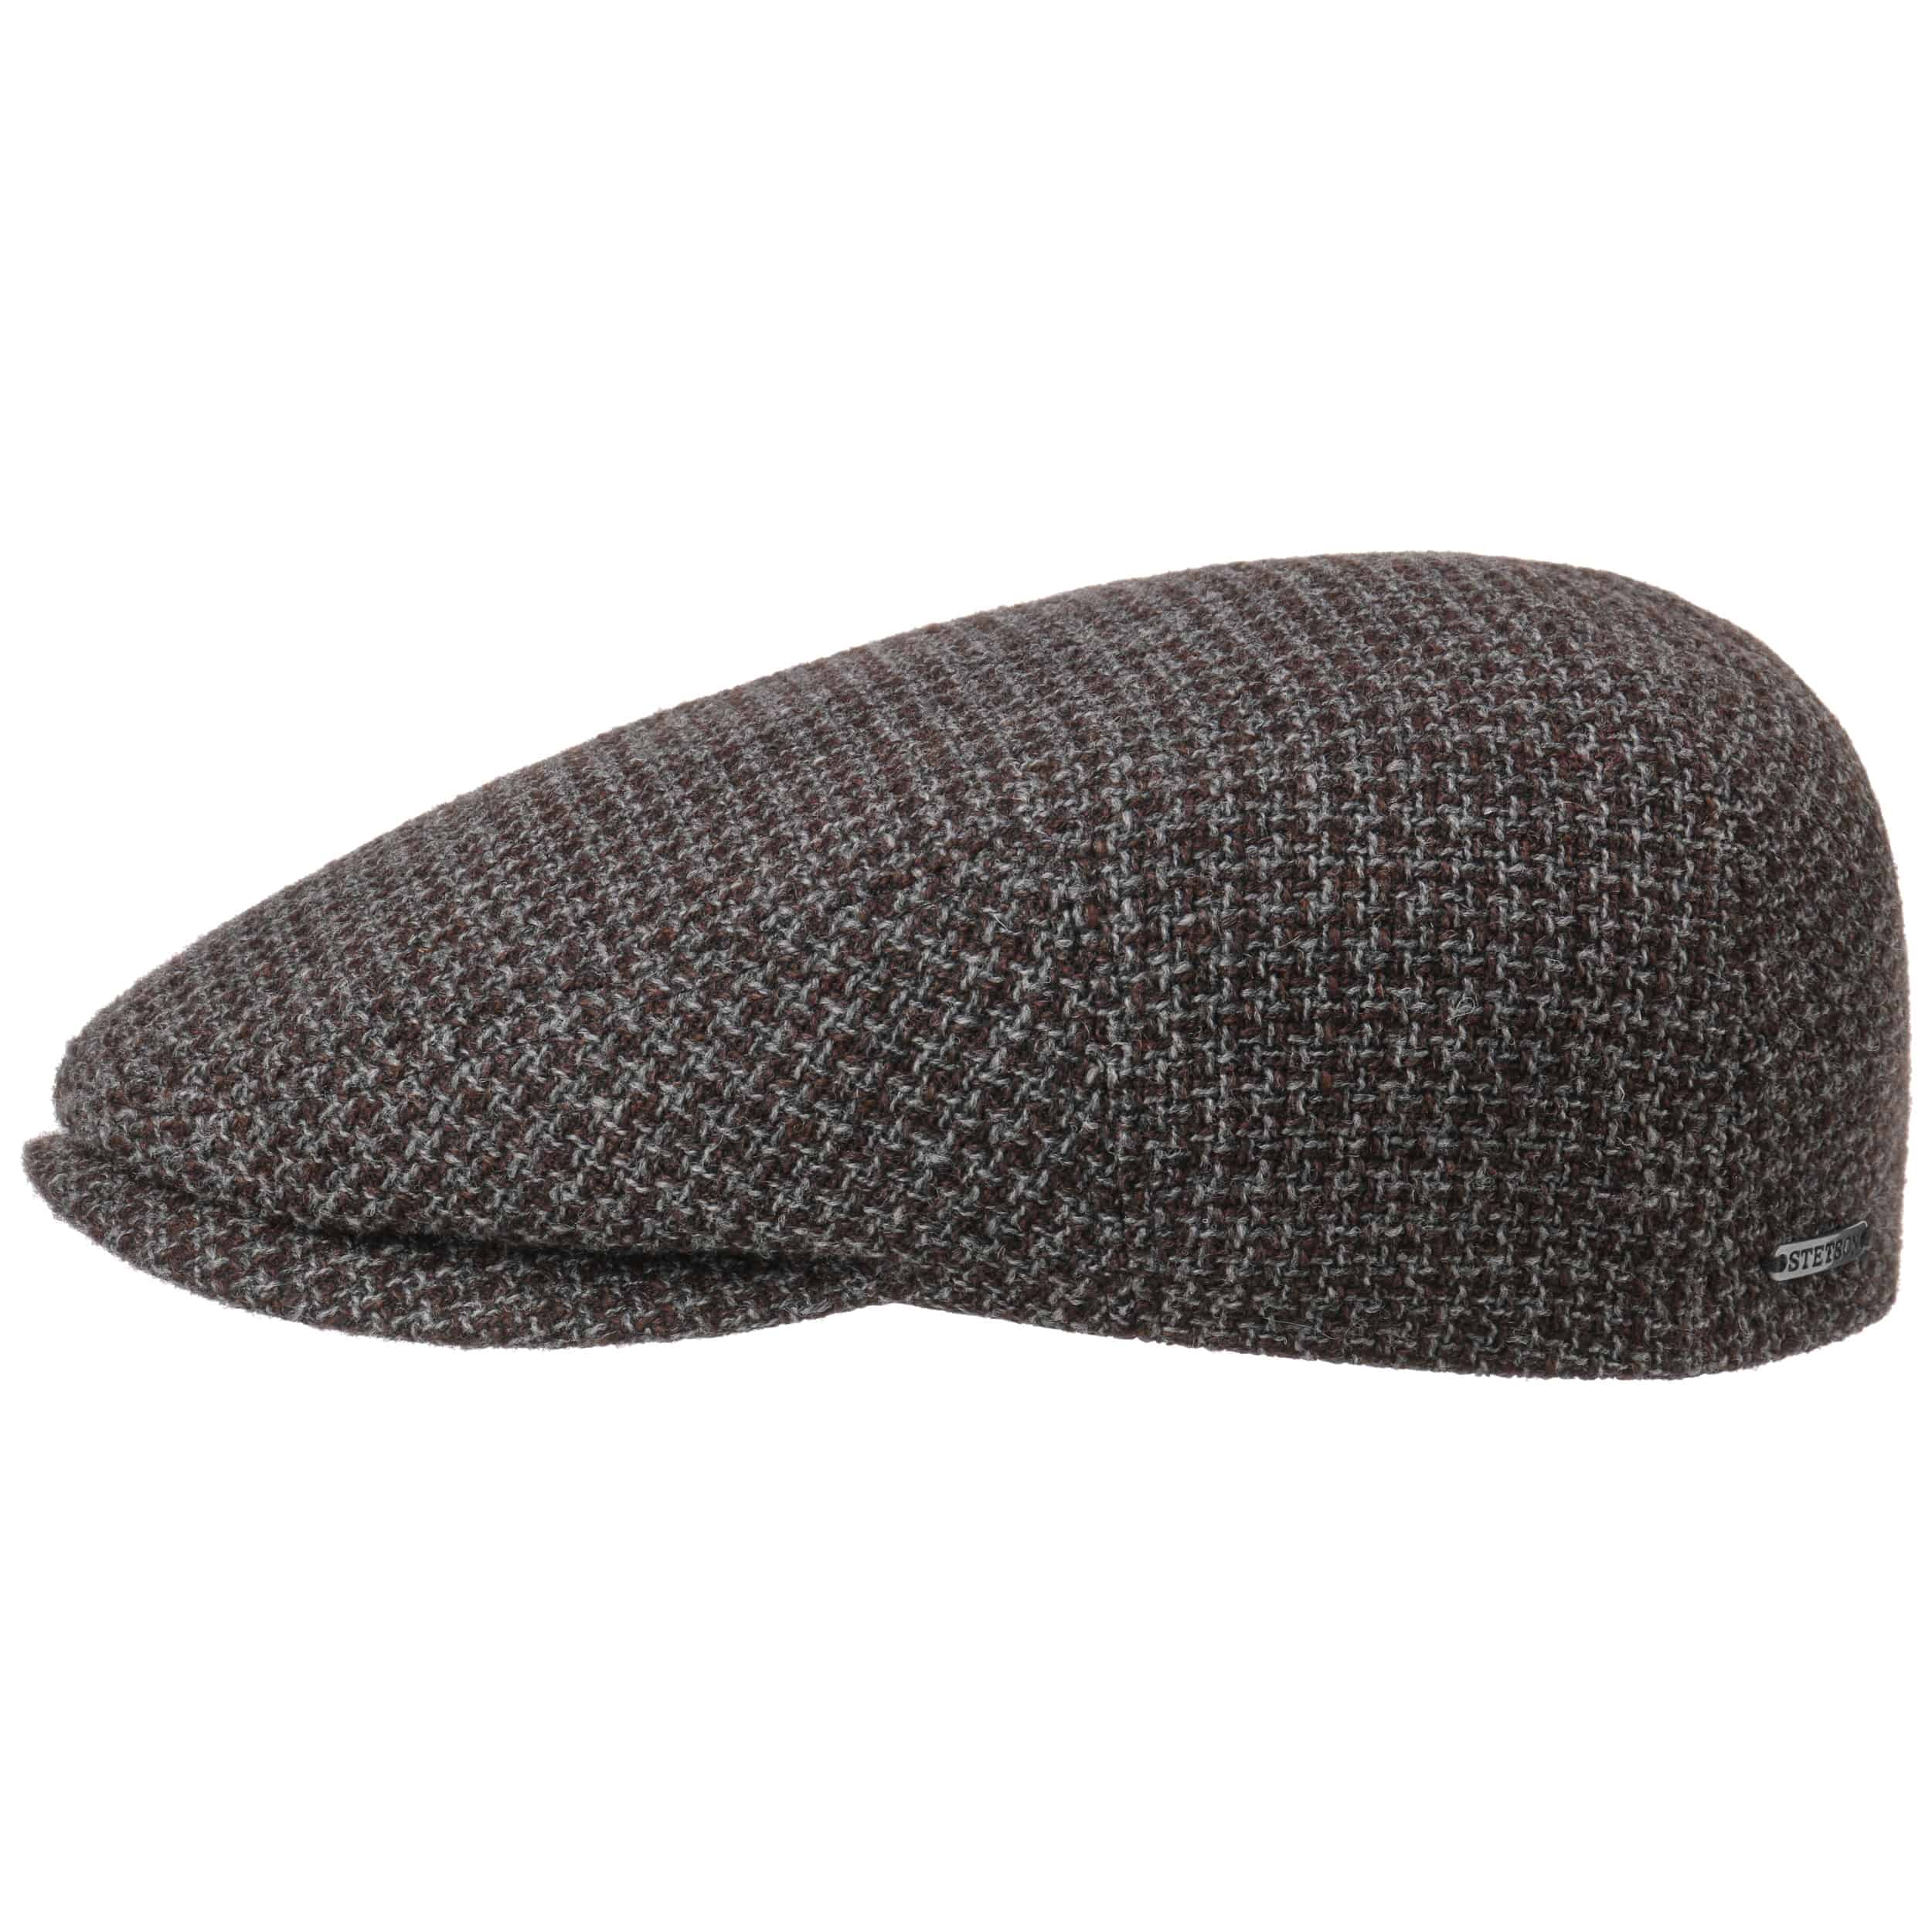 stetson-kent-wool-flat-cap-with-earflaps- – The Hat Company